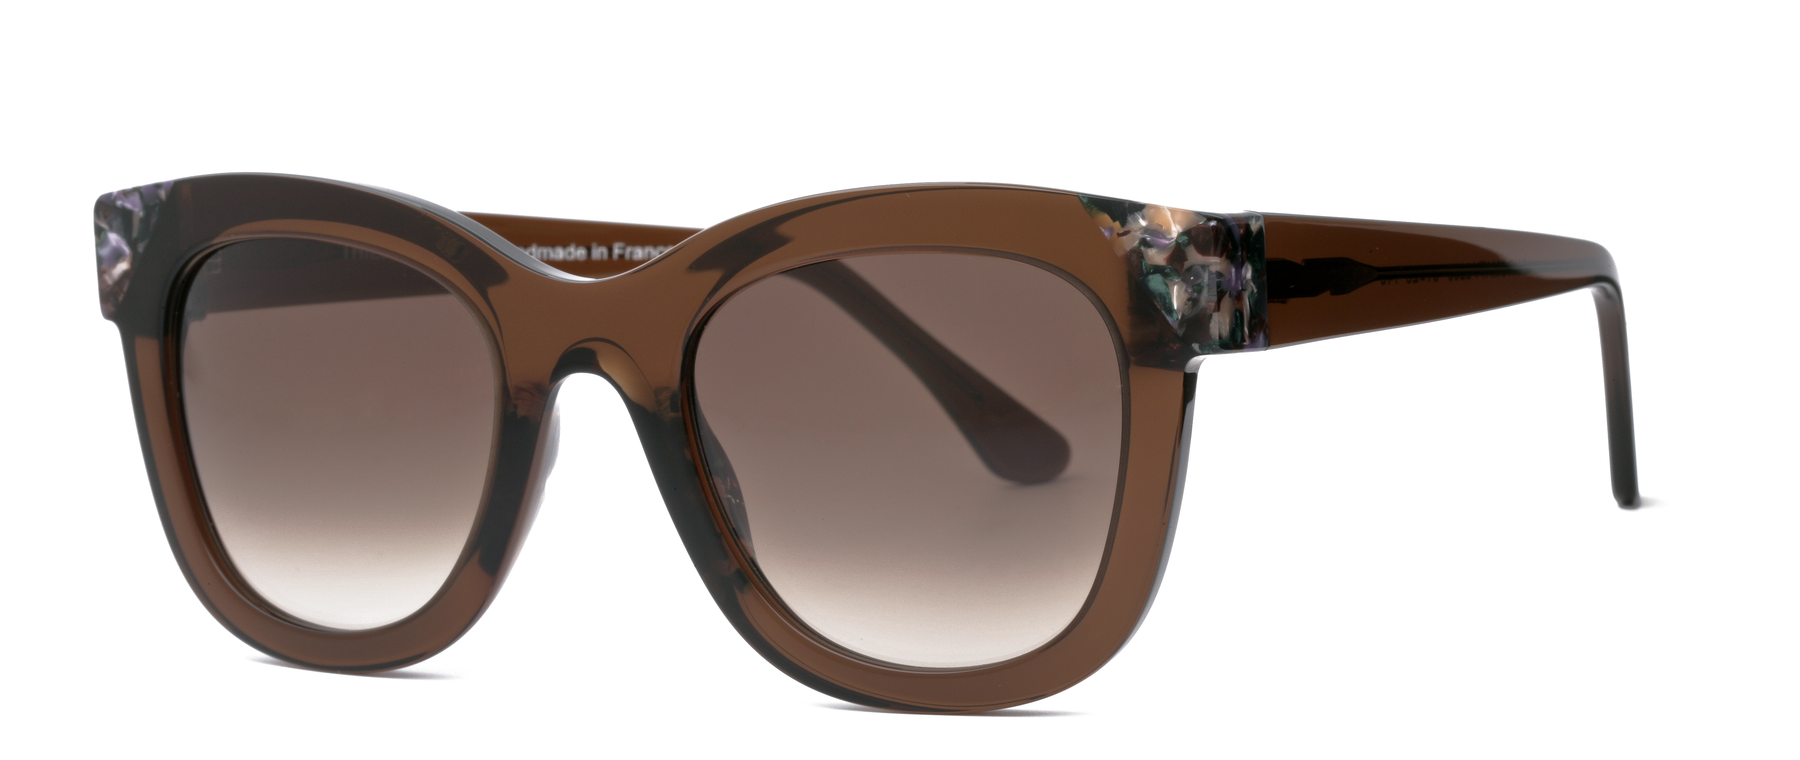 Alexander Daas - Thierry Lasry Chromaty Sunglasses - Brown - Side View